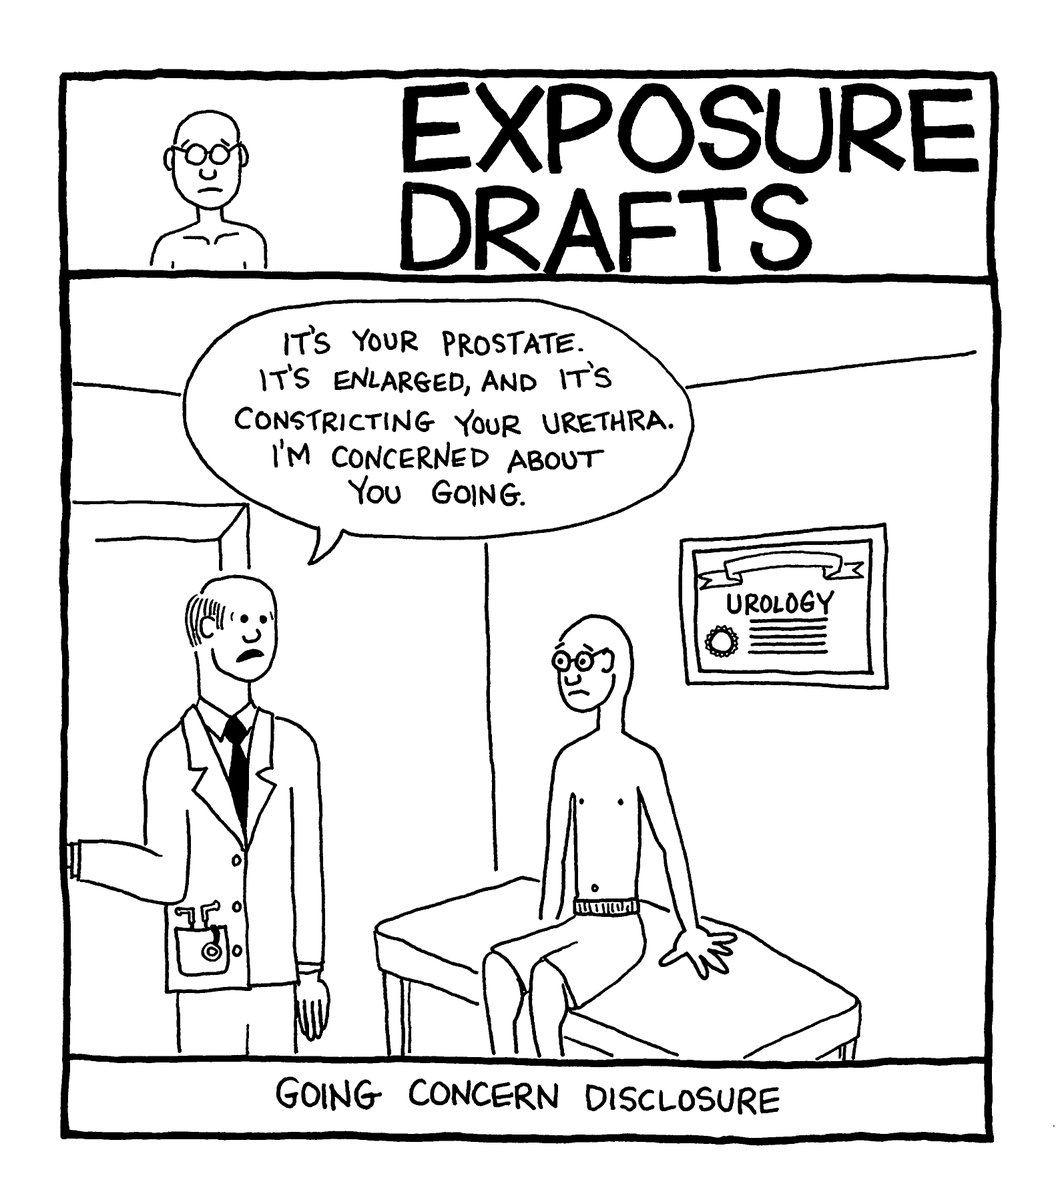 Busy season: the prostate exam of the accounting profession. 

If you're not overwhelmed, check out my podcast with @cnewquist called @ohmyfraud. It's really good and you can get #CPE credit through @earmarkcpe.

#ExposureDrafts #AccountingCartoon #accounting #cartoon #CPA